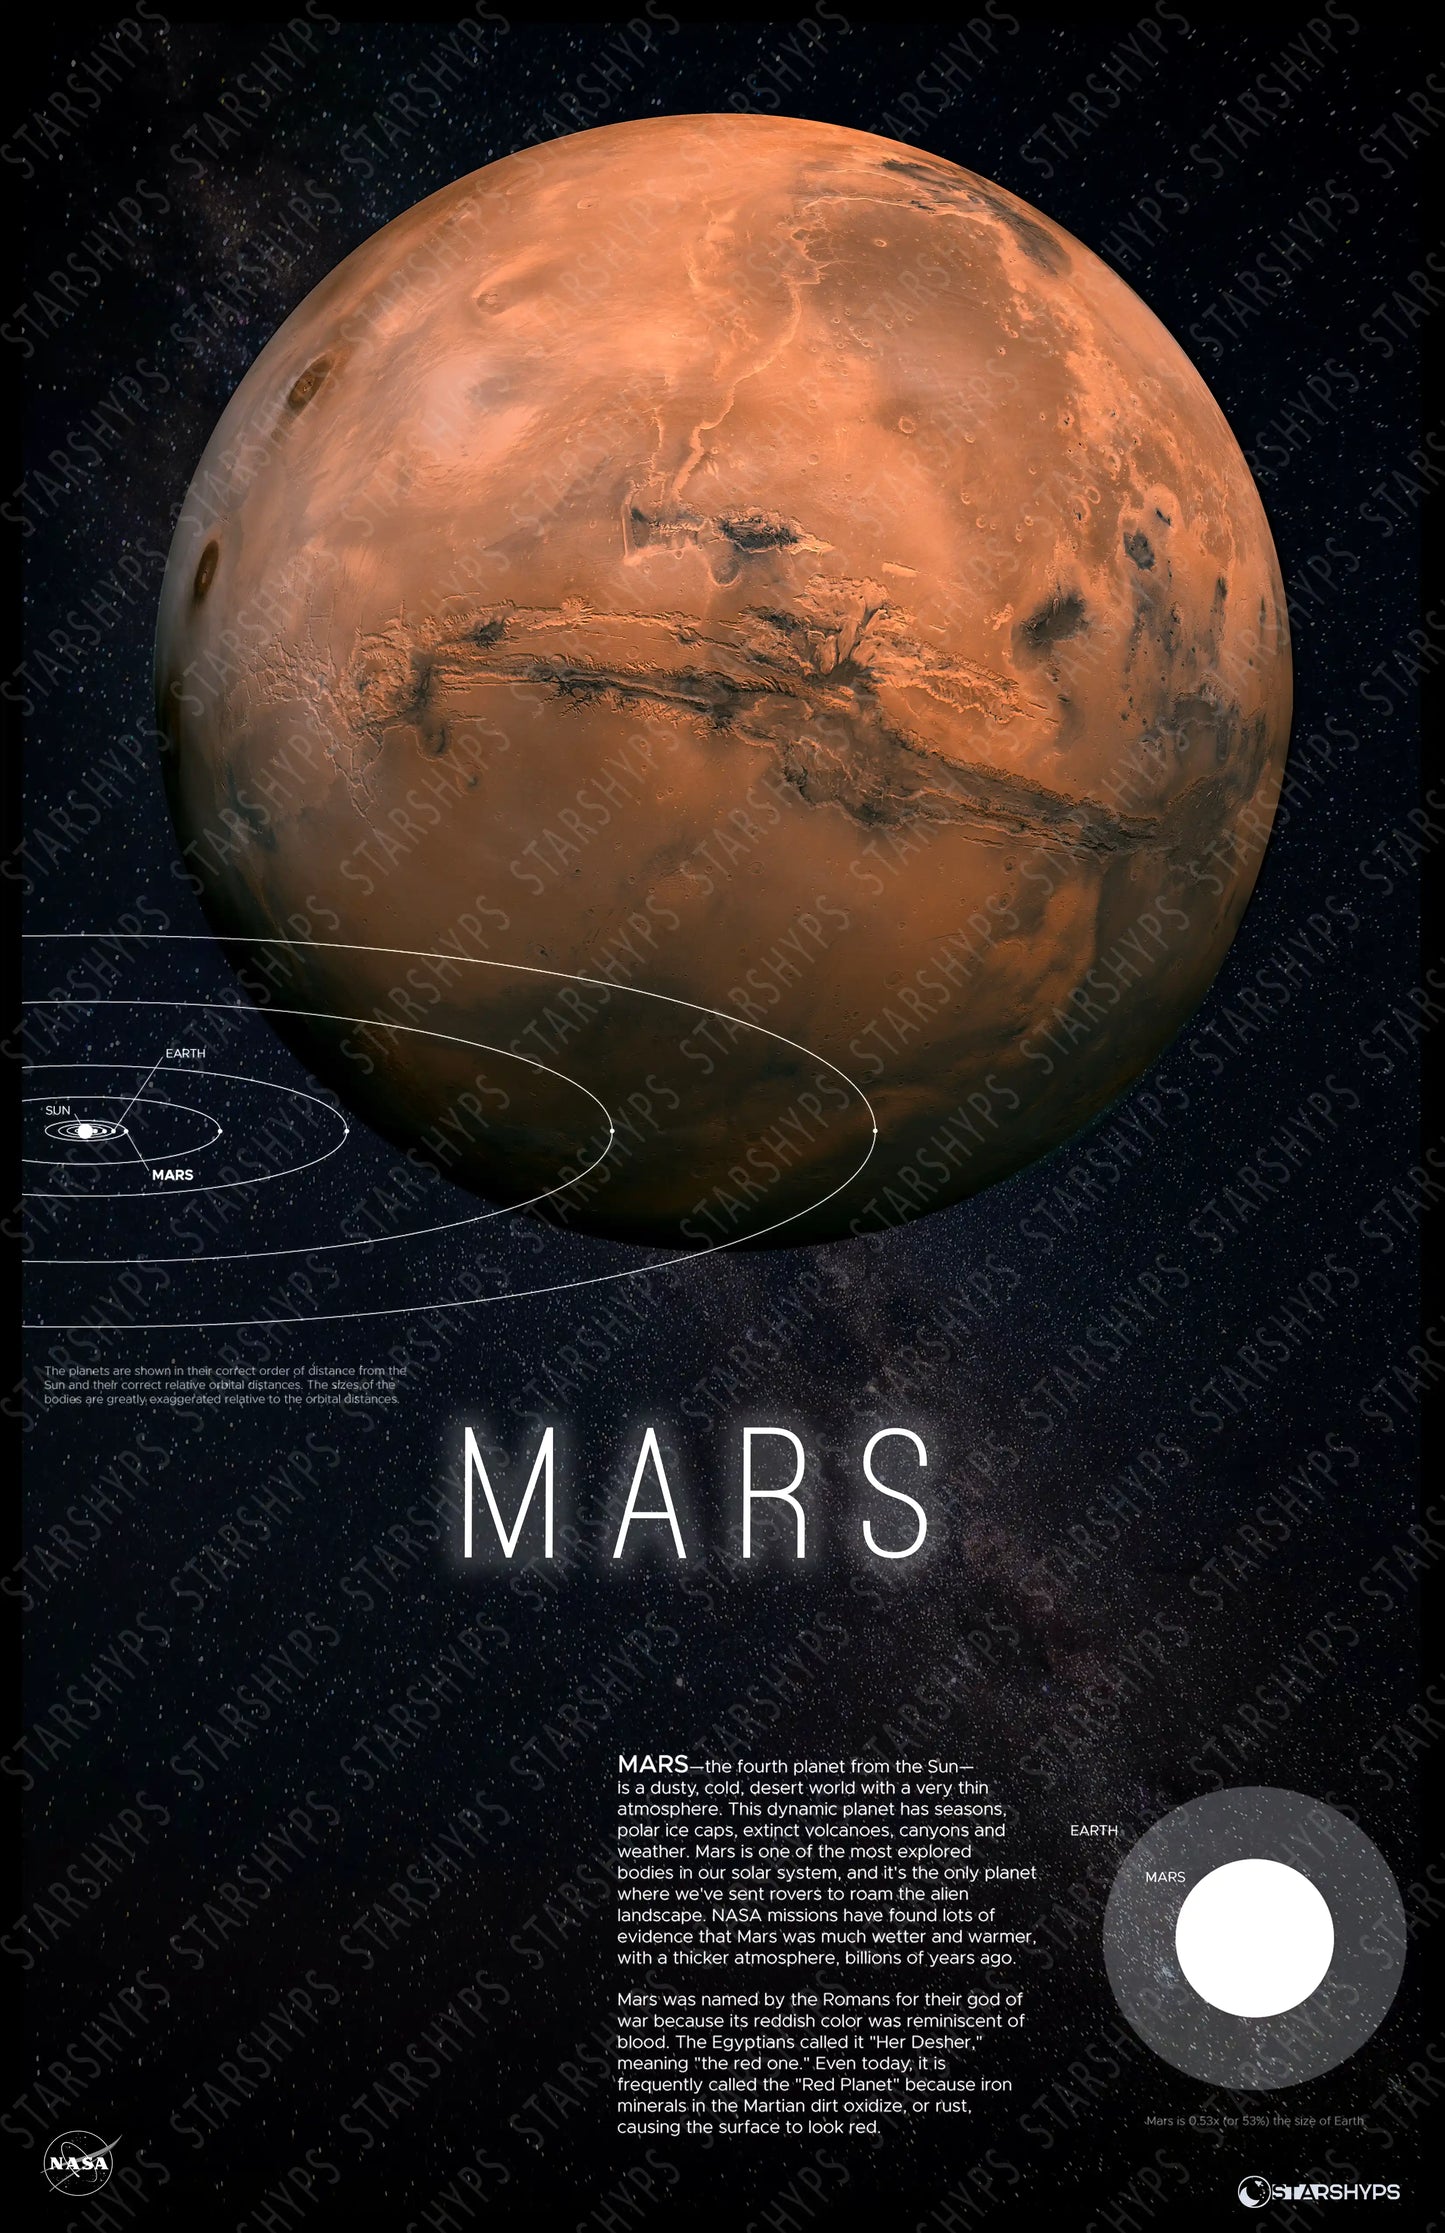 Mars Martian Majesty Print | Mars Print | Rocket Blueprint Posters | A detailed poster of Mars displaying a high-resolution image of the planet, the title "MARS," a paragraph describing the planet, and a size comparison diagram with Earth. The poster is watermarked with the Starshyps logo and is set against a starry background.